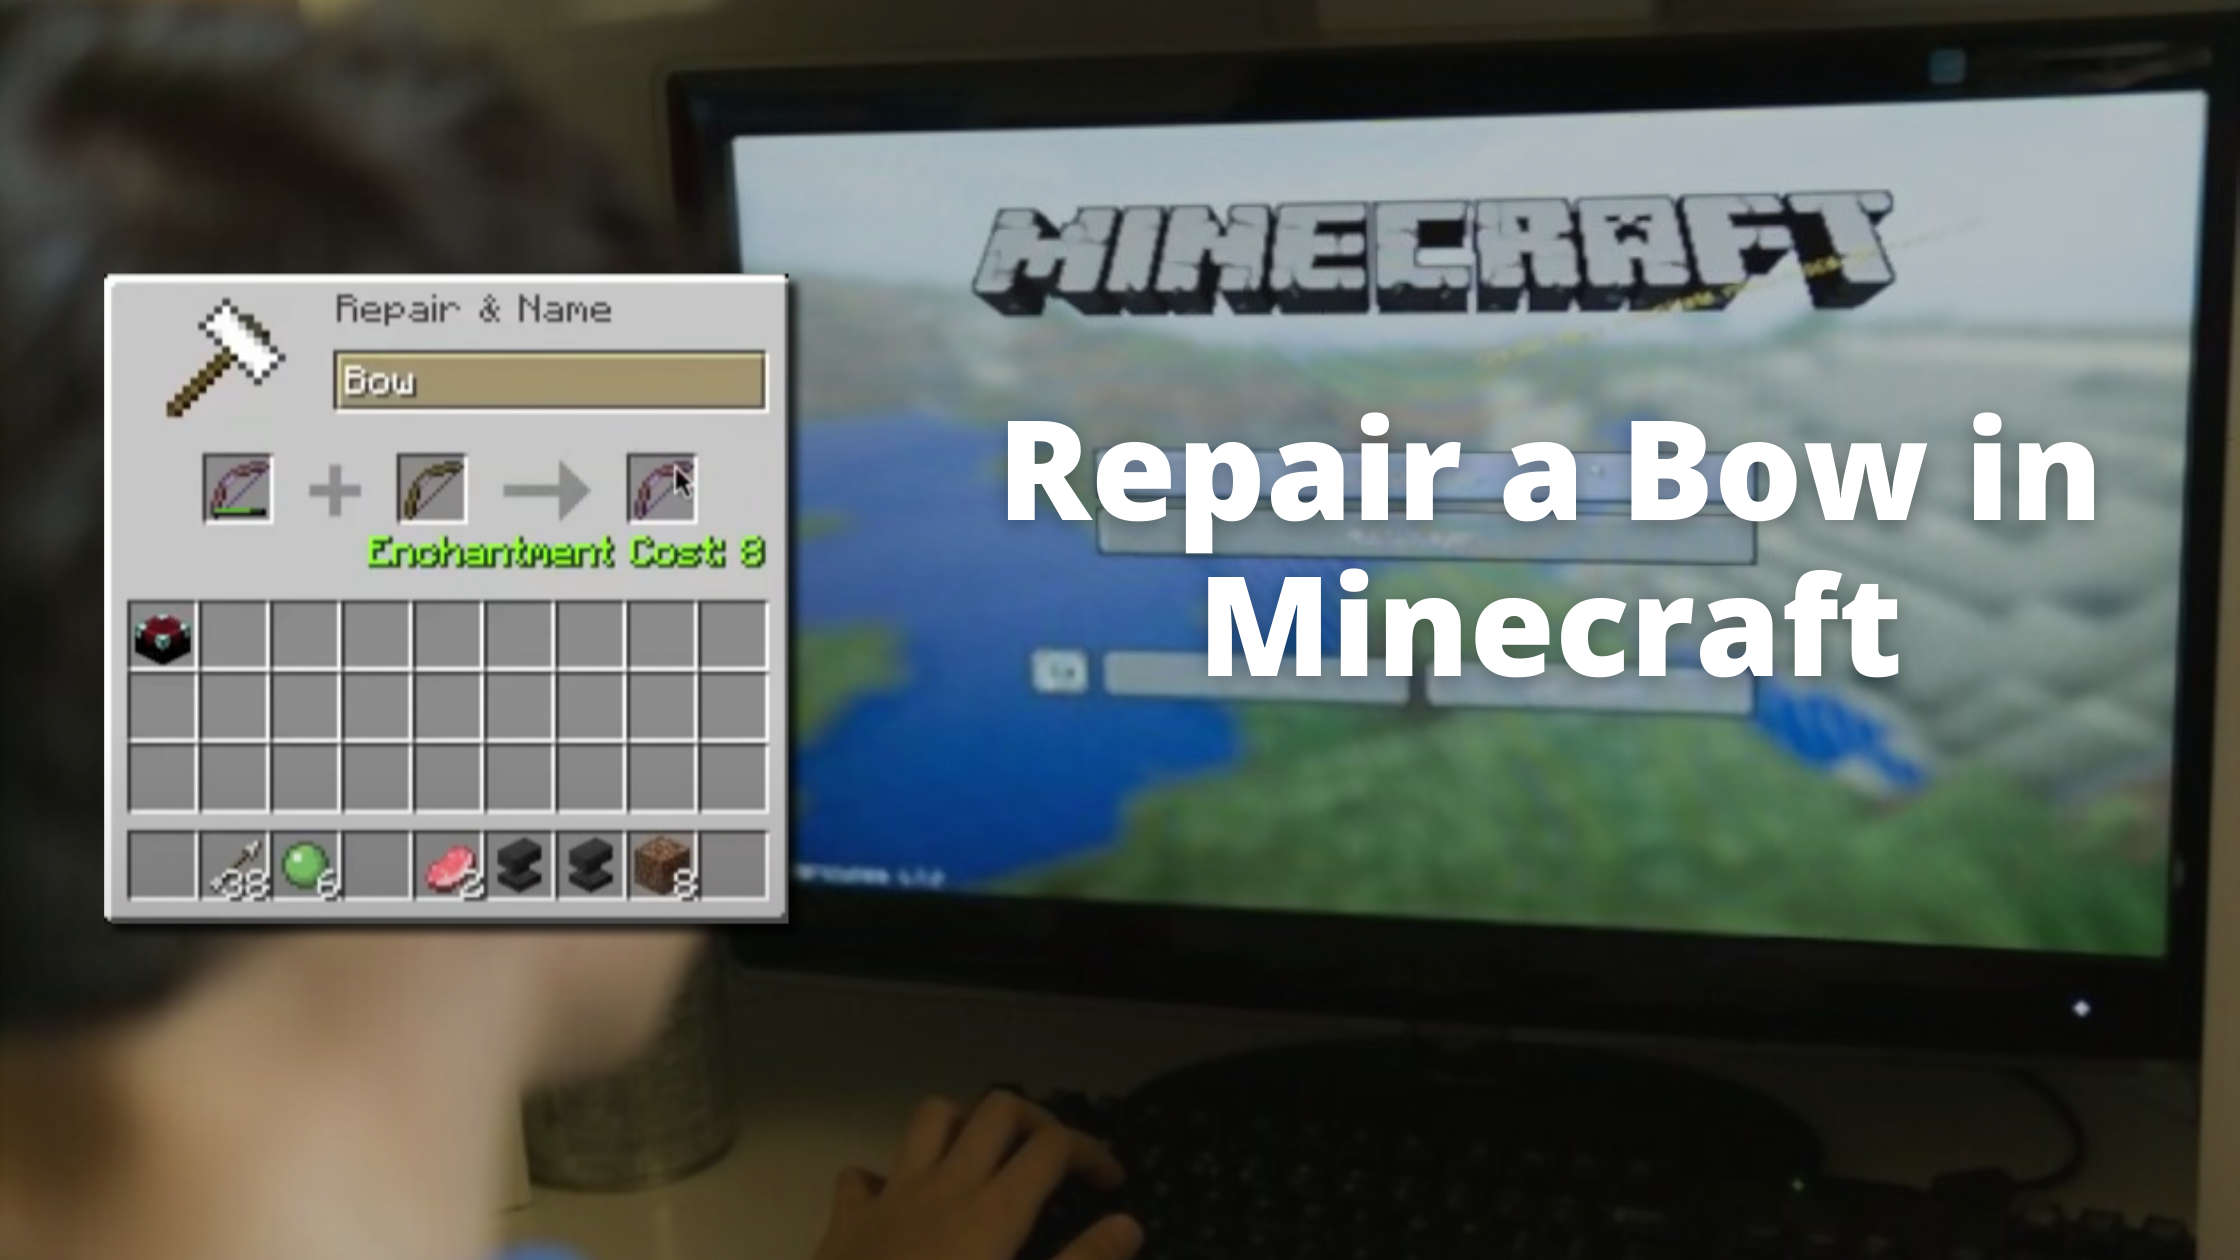 How To Repair a Bow In Minecraft Using an Anvil, Grindstone or